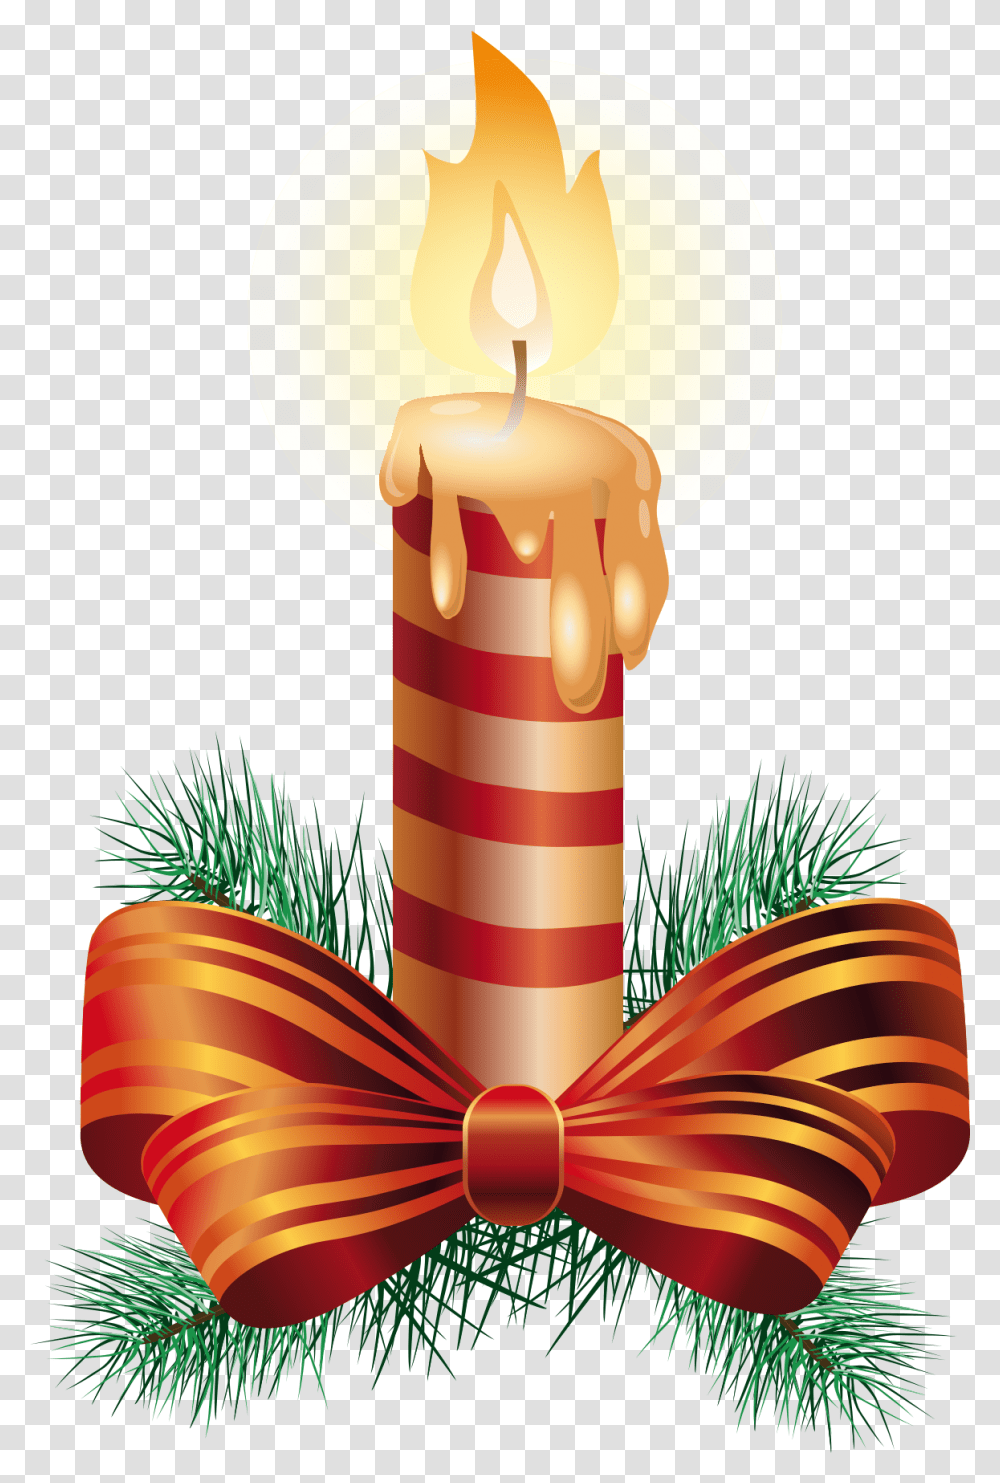 Download Candle Vector Ornament Red Ribbon And Candle, Balloon, Fire, Flame, Tie Transparent Png